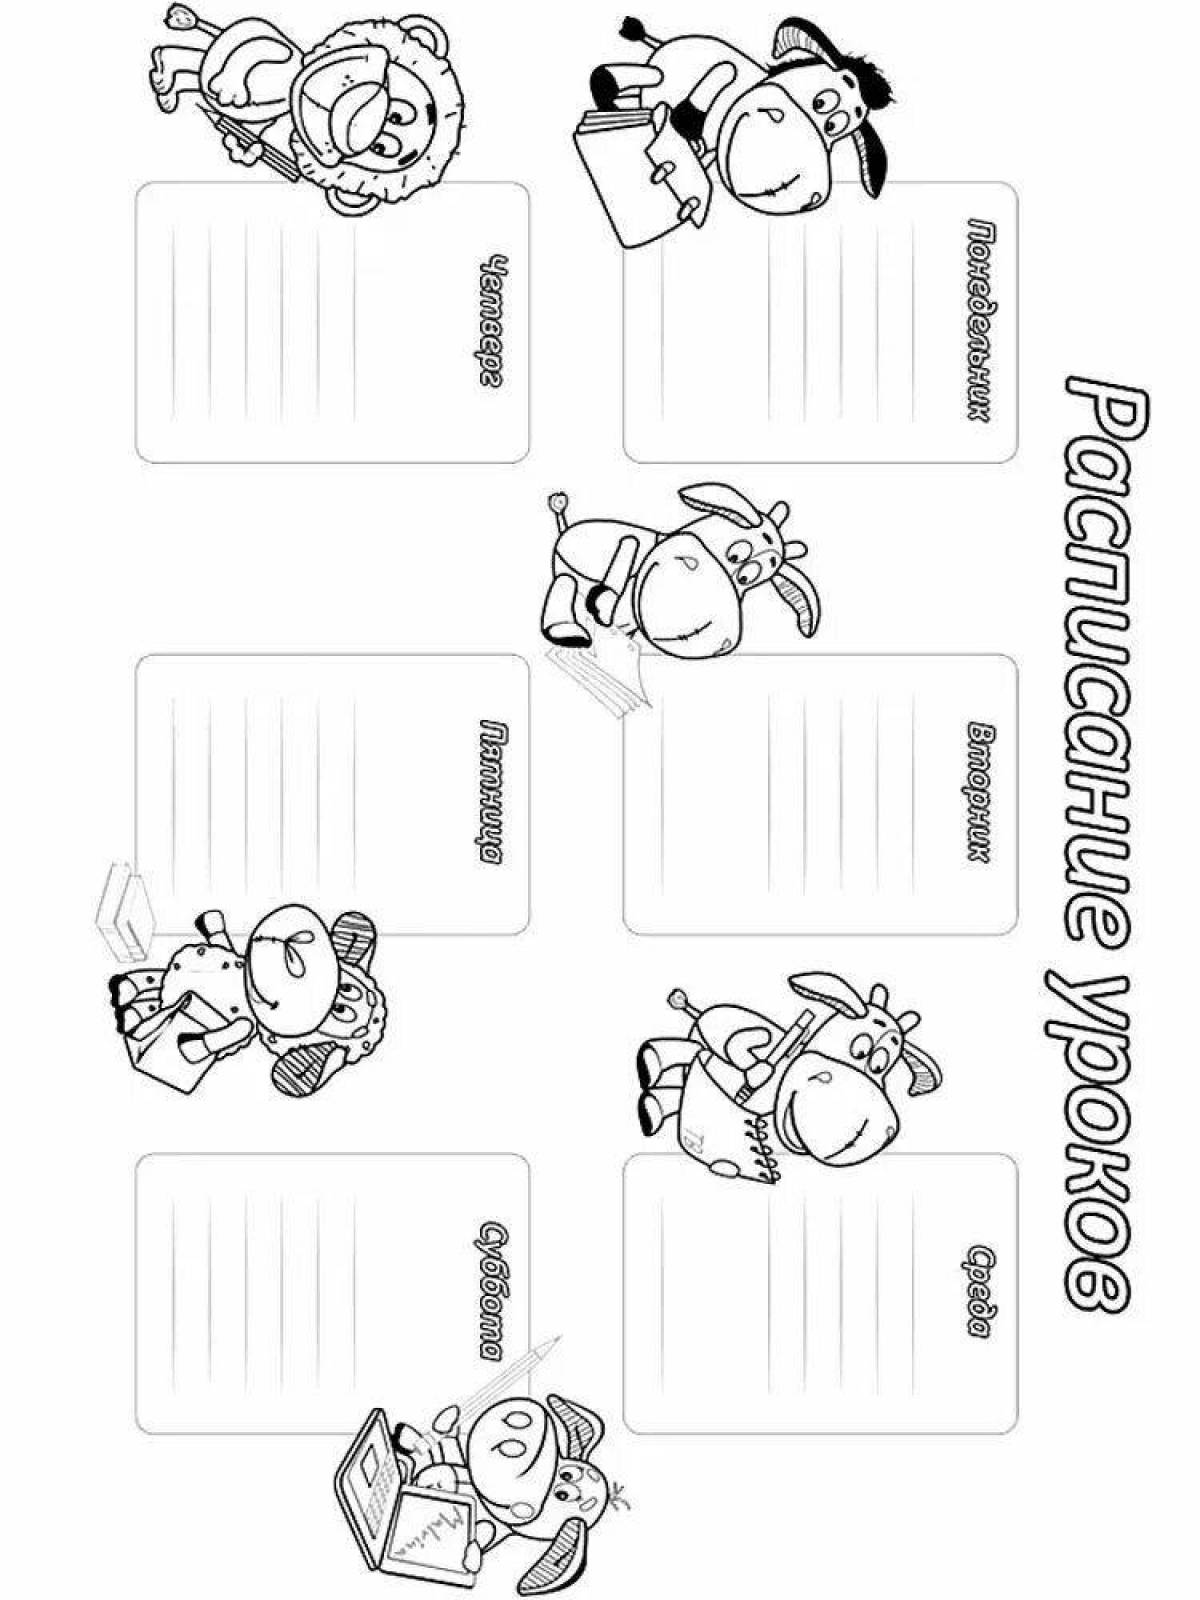 Timetable coloring page with color splatter